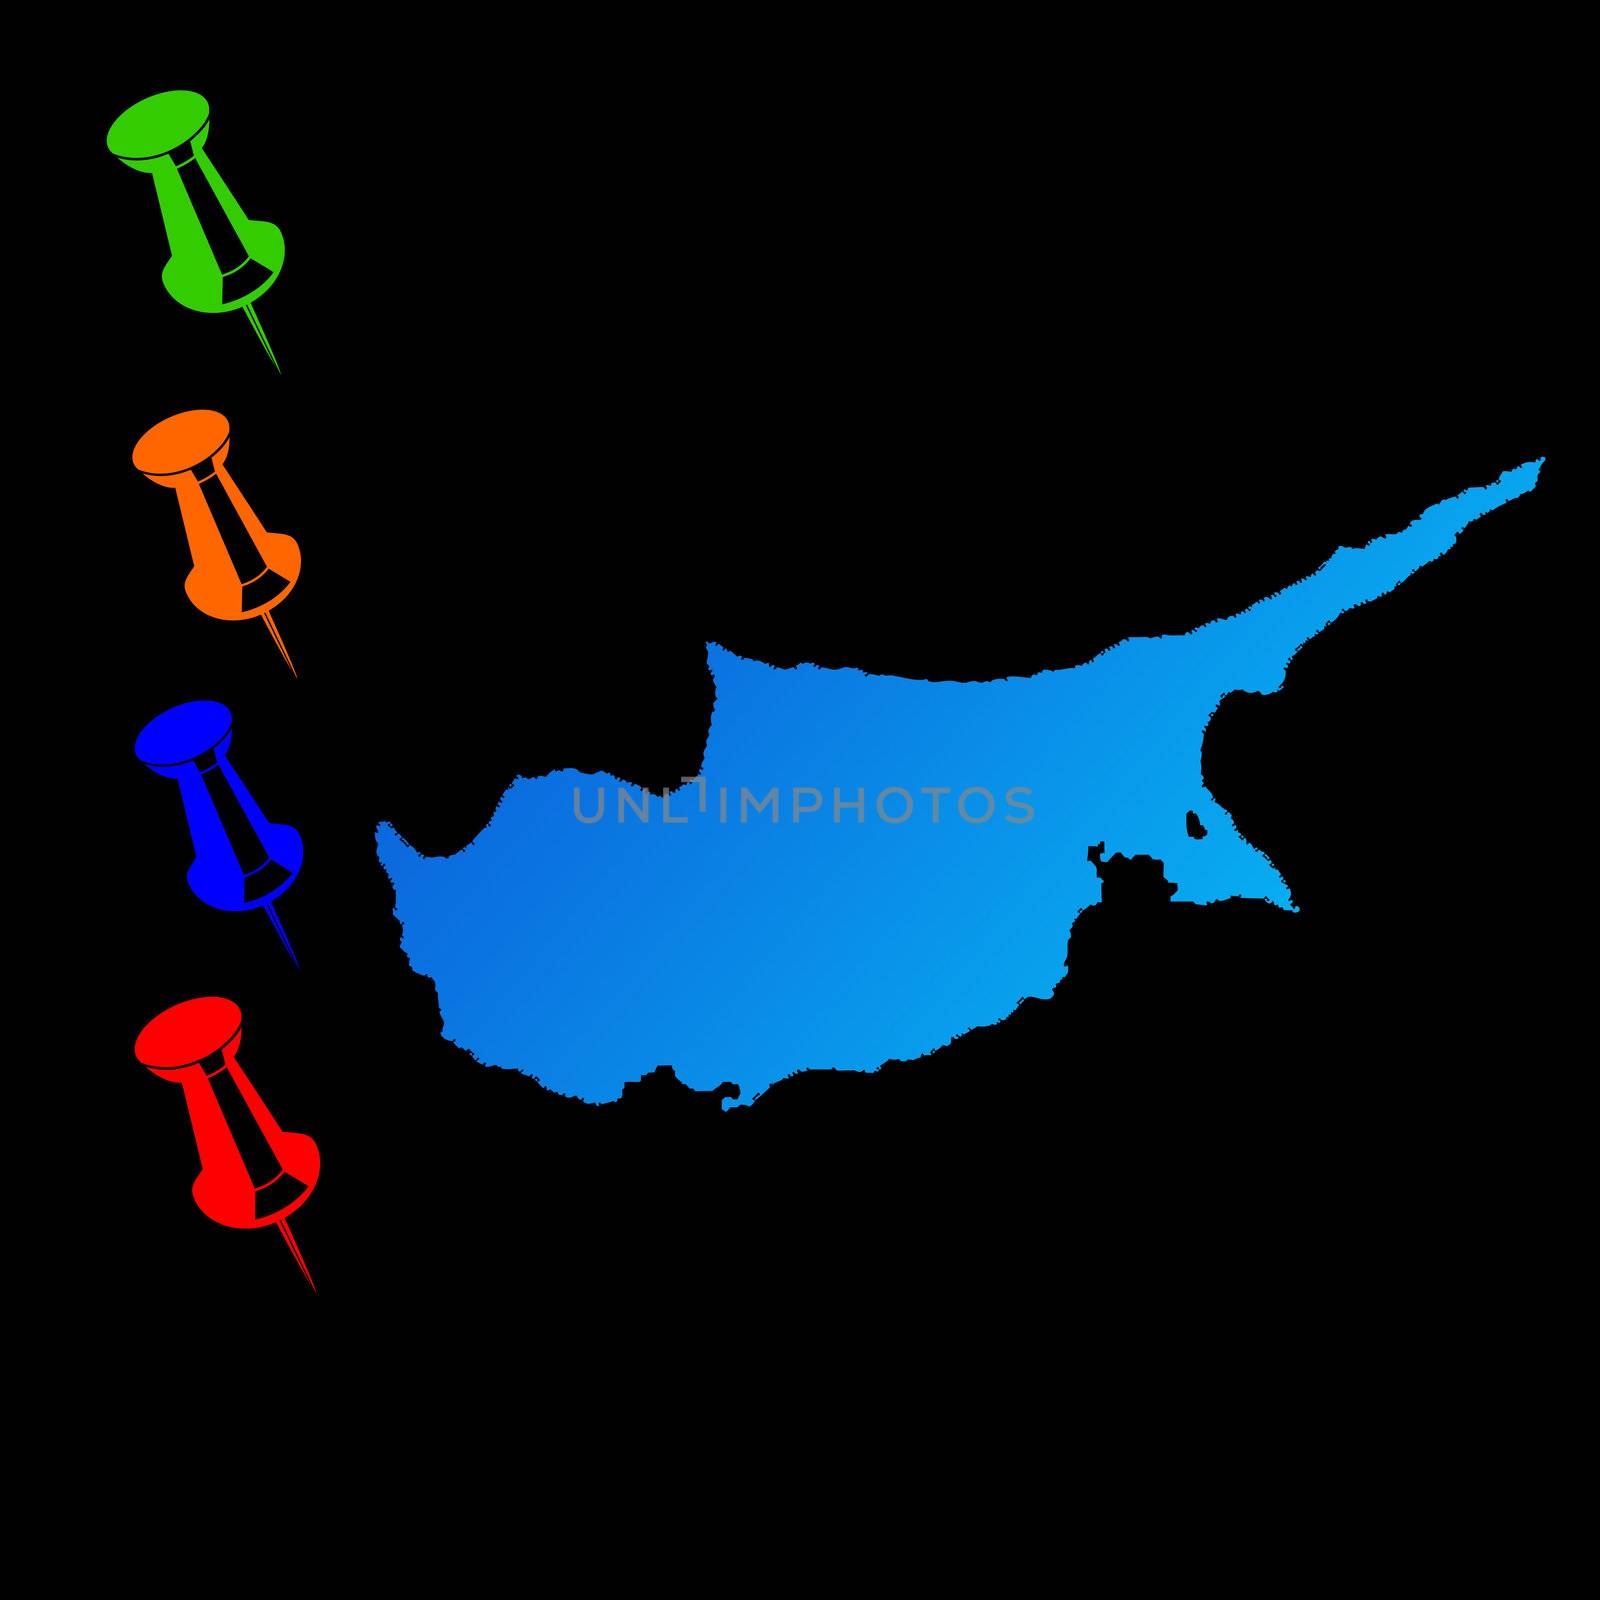 Cyprus travel map with push pins on black background.